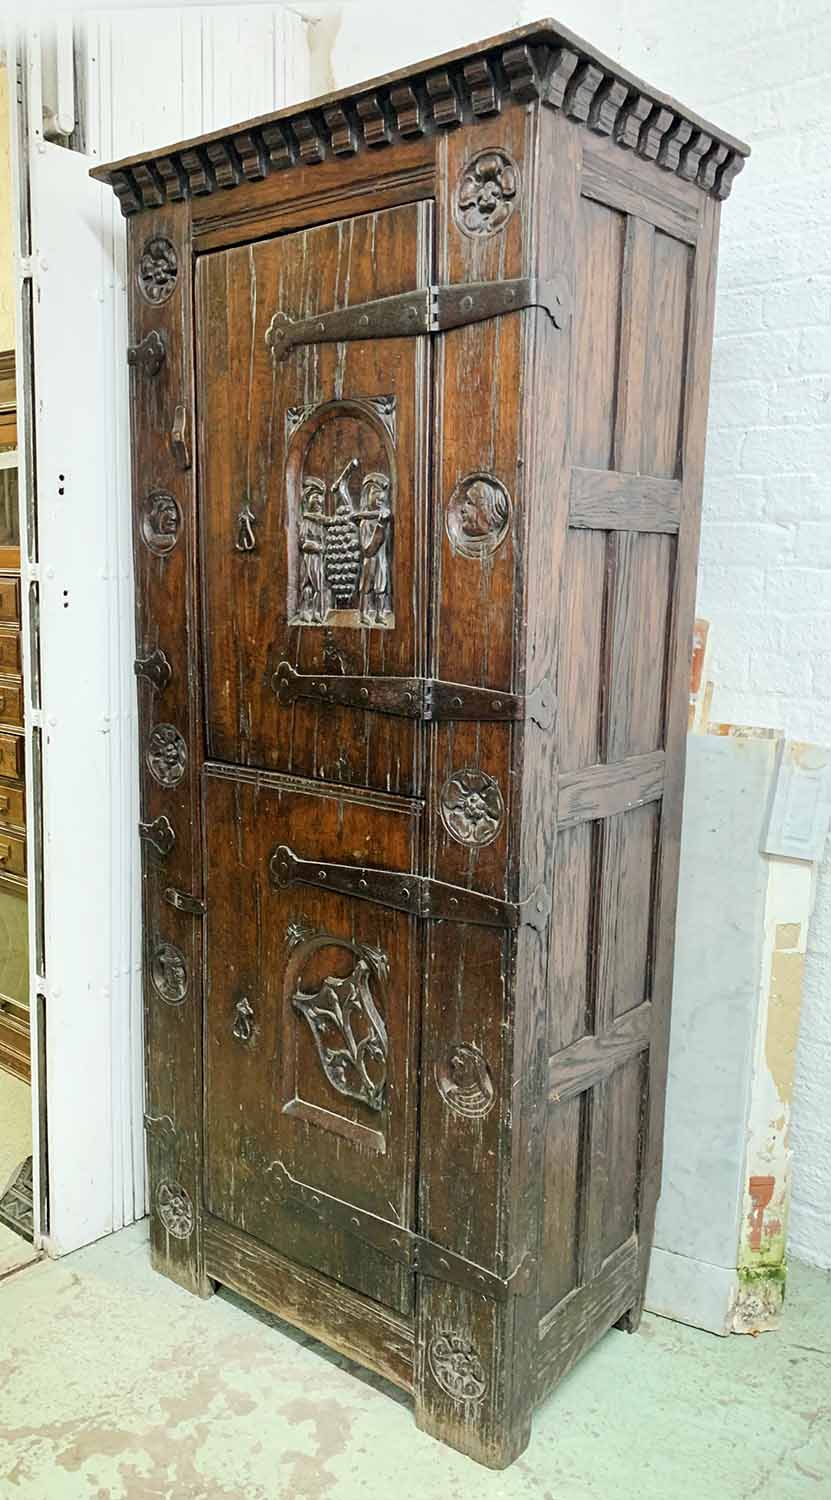 CUPBOARD, 19th century continental oak with earlier, possible 17th century, elements,